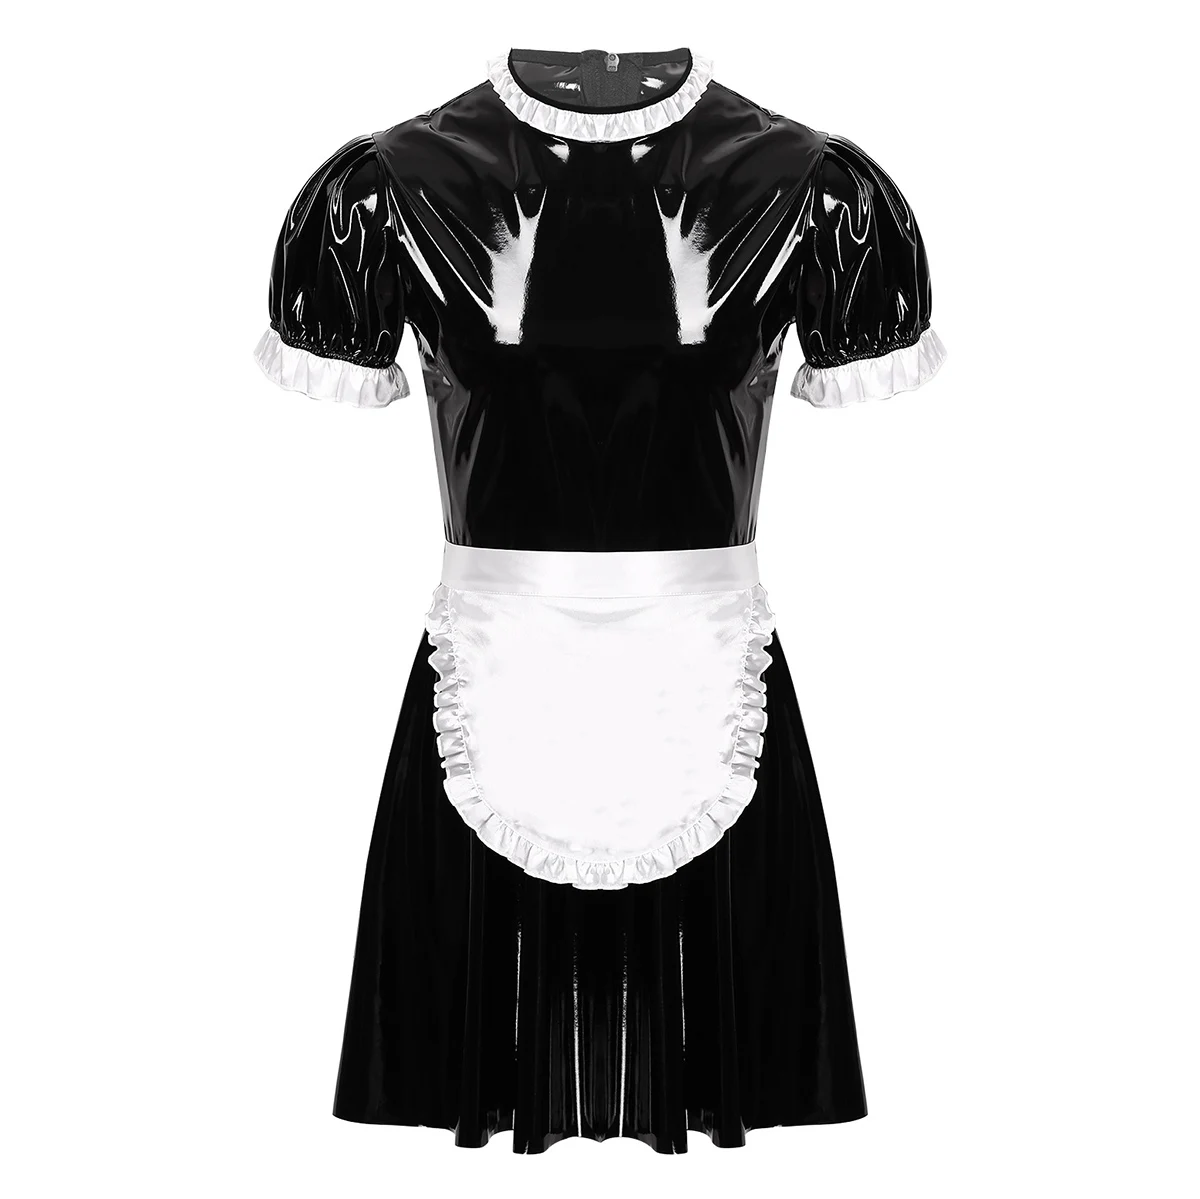 

iEFiEL Mens Sissy Maid Cosplay Costume Set Patent Leather Maid Servant Uniform Flared Dress with Apron Corssdress Gay Club